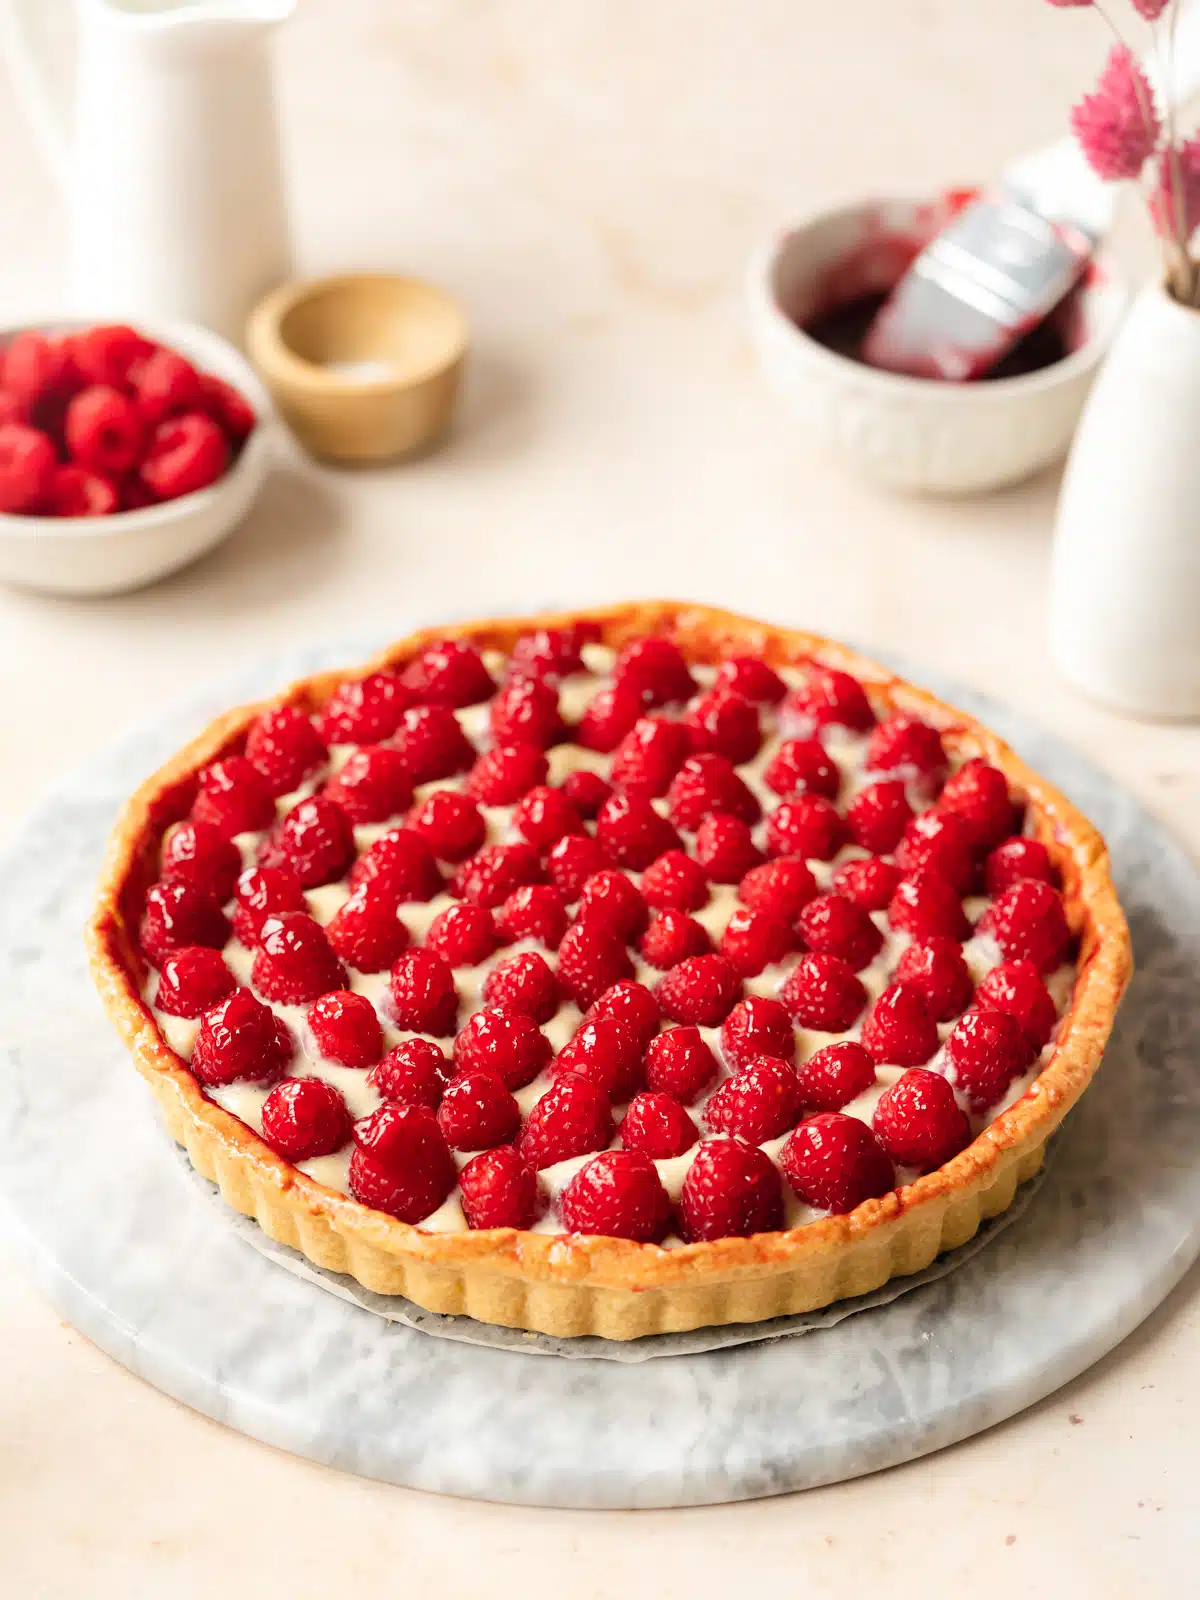 vegan french raspberry tart filled with dairy-free pastry cream and topped with raspberries on a marble surface and a bowl of fresh raspberries in the background.